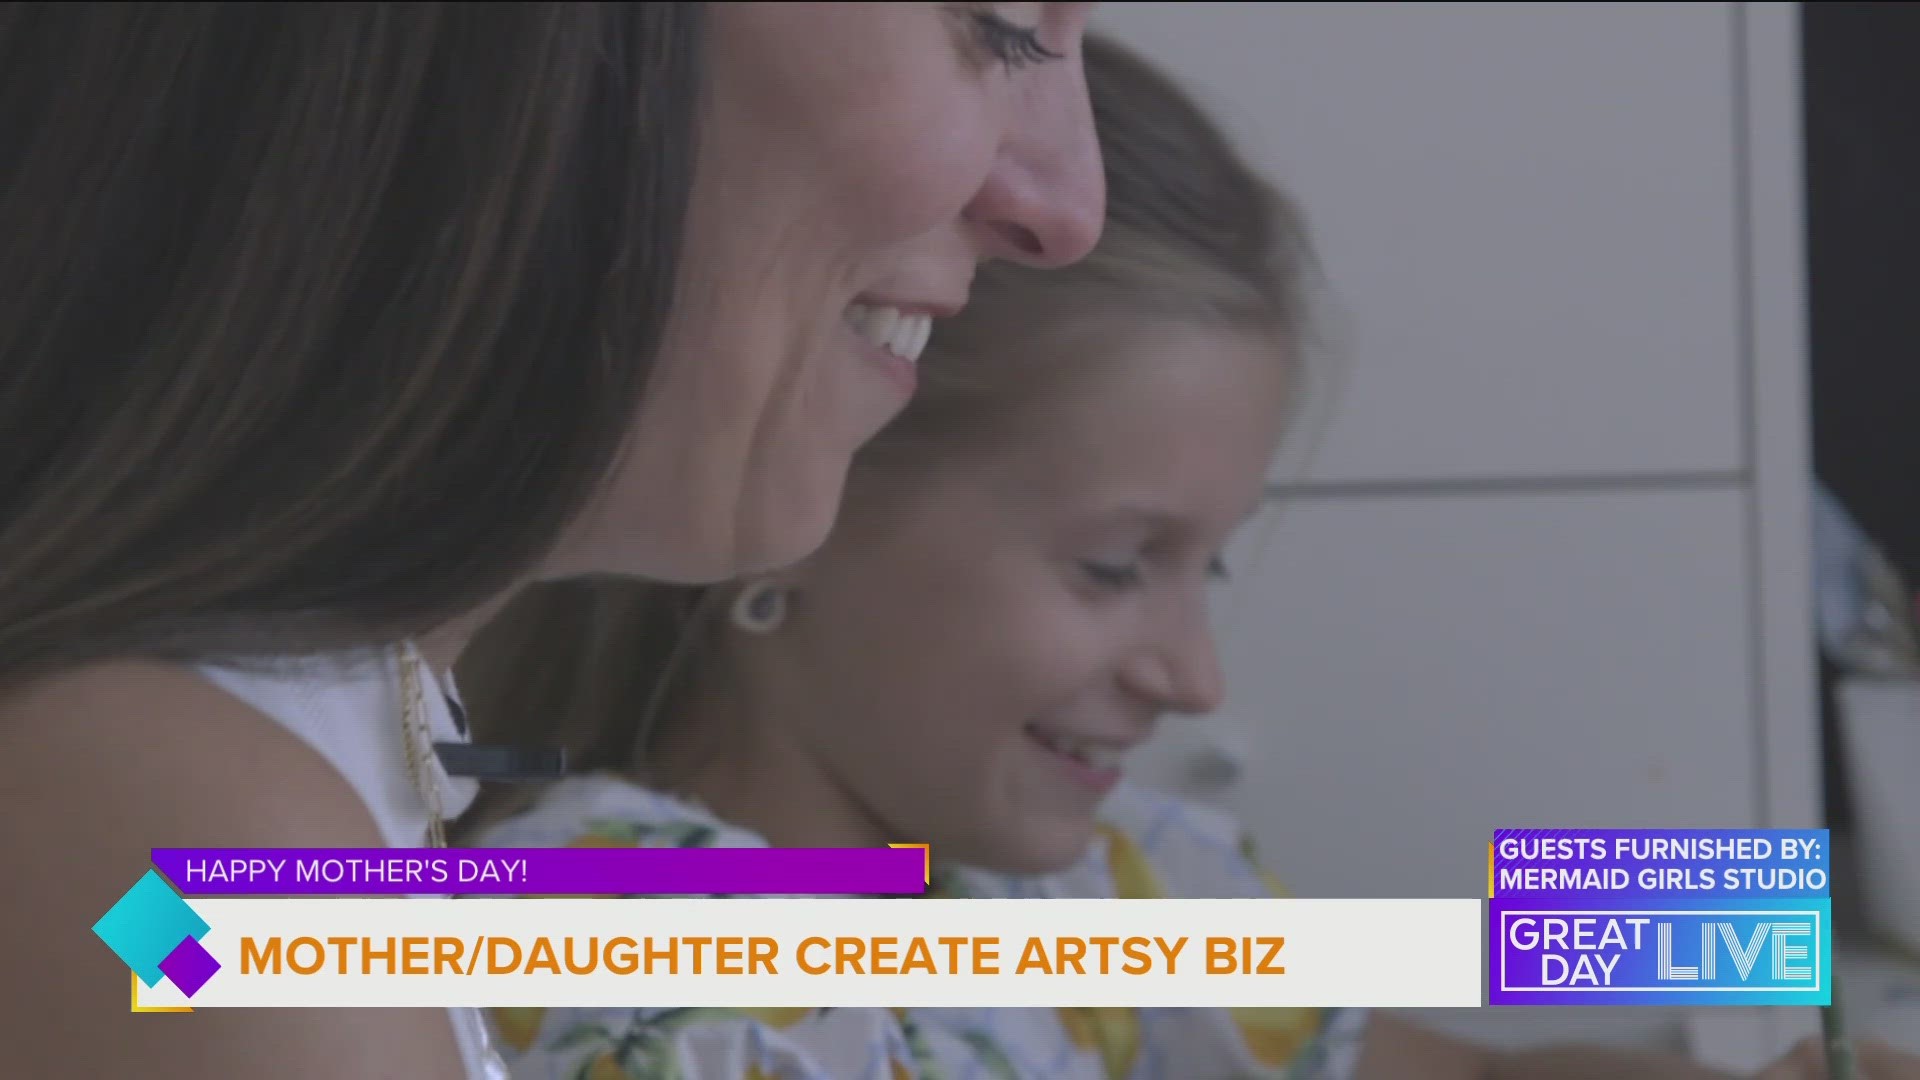 The mother/daughter duo behind Mermaid Girls Studio started making crafts for friends, but it's turned into a budding business. mermaidgirlsstudio.com